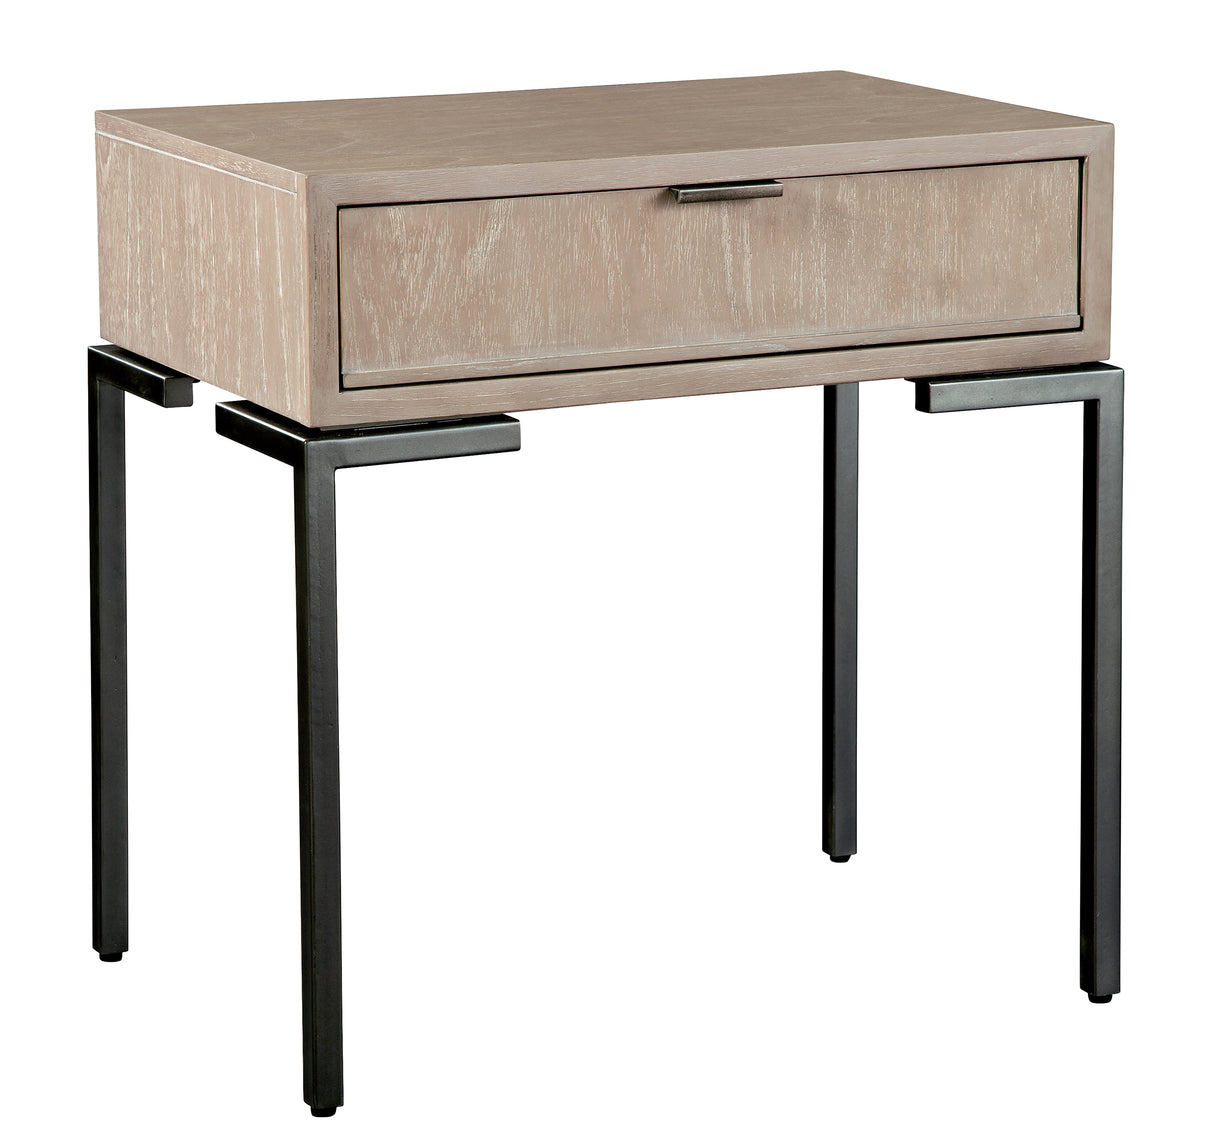 Hekman 25363 Scottsdale 27.75in. x 18.75in. x 28.25in. Single Drawer Night Stand